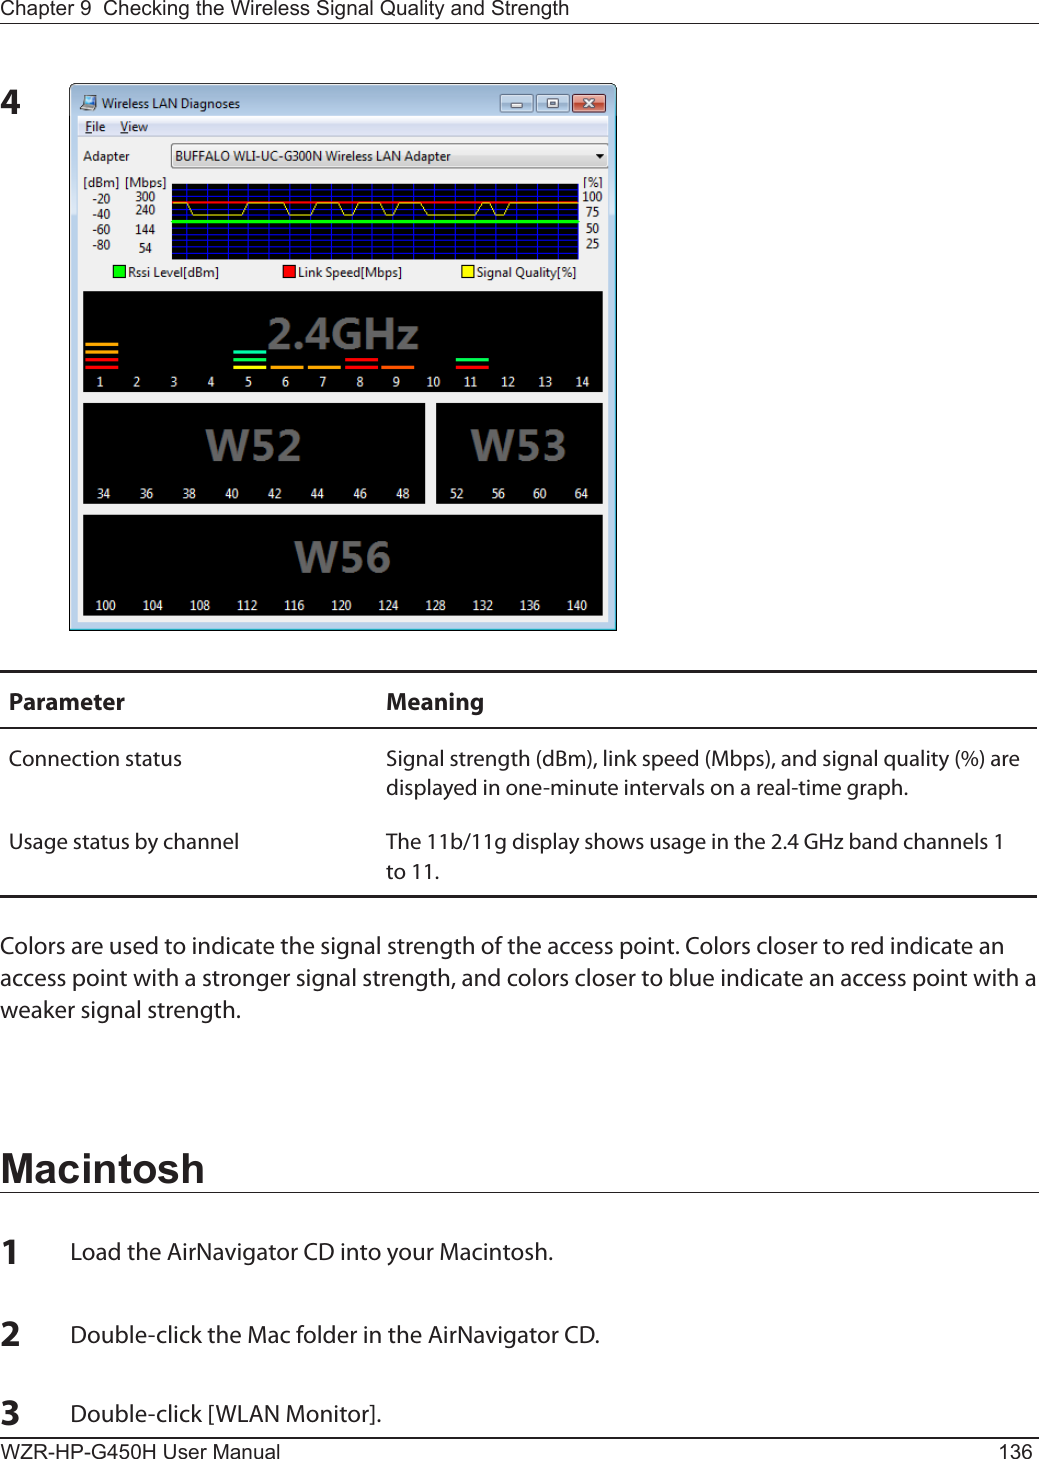 WZR-HP-G450H User Manual 136Chapter 9  Checking the Wireless Signal Quality and Strength4Parameter MeaningConnection status Signal strength (dBm), link speed (Mbps), and signal quality (%) are displayed in one-minute intervals on a real-time graph.Usage status by channel The 11b/11g display shows usage in the 2.4 GHz band channels 1 to 11.Colors are used to indicate the signal strength of the access point. Colors closer to red indicate an access point with a stronger signal strength, and colors closer to blue indicate an access point with a weaker signal strength.Macintosh1Load the AirNavigator CD into your Macintosh.2Double-click the Mac folder in the AirNavigator CD.3Double-click [WLAN Monitor].